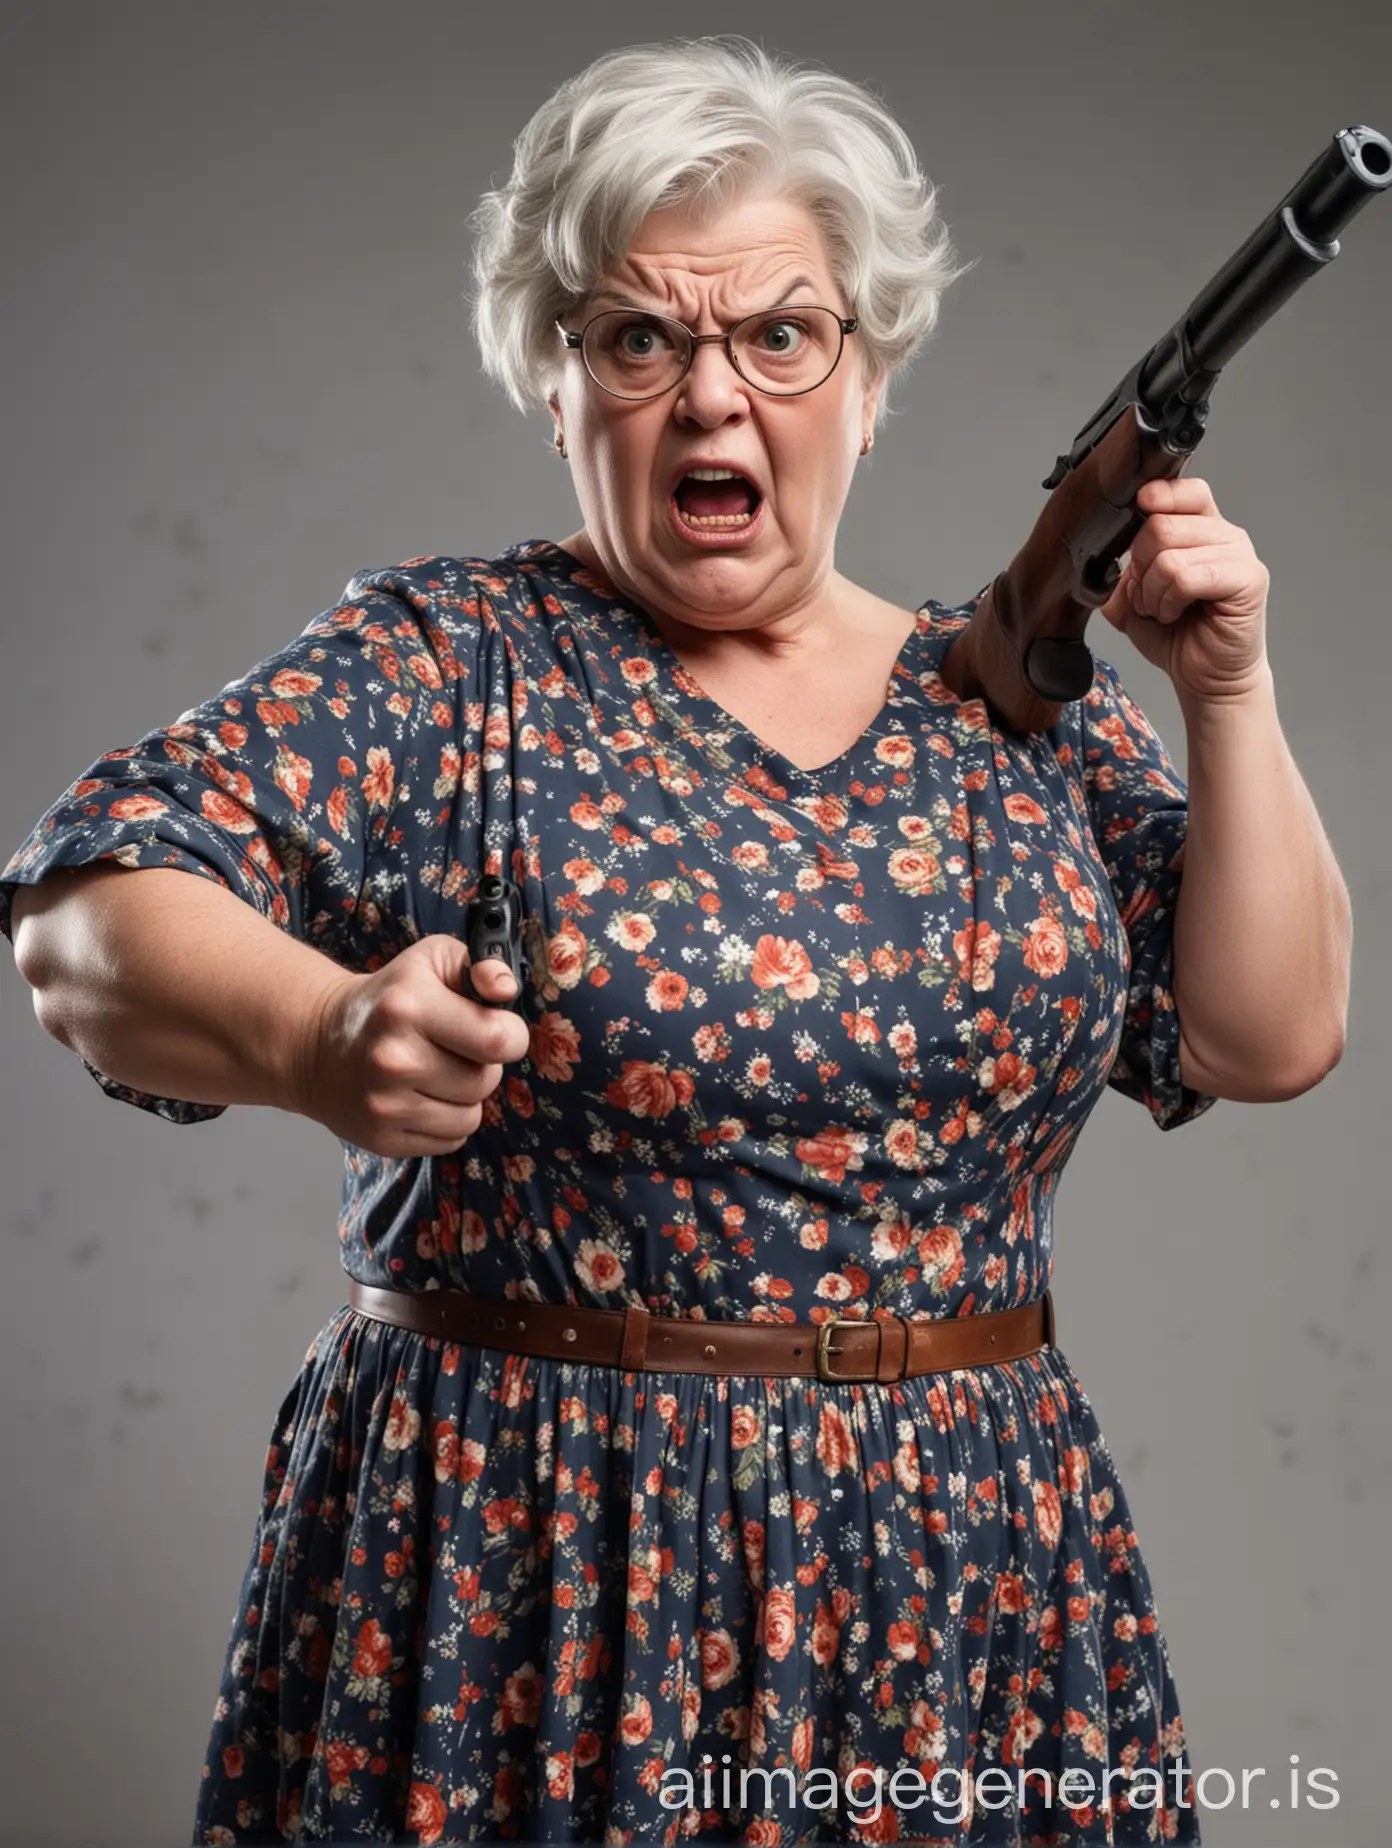 fat old lady in dress, short hair, angry, pointing a double barreled shotgun towards the camera
